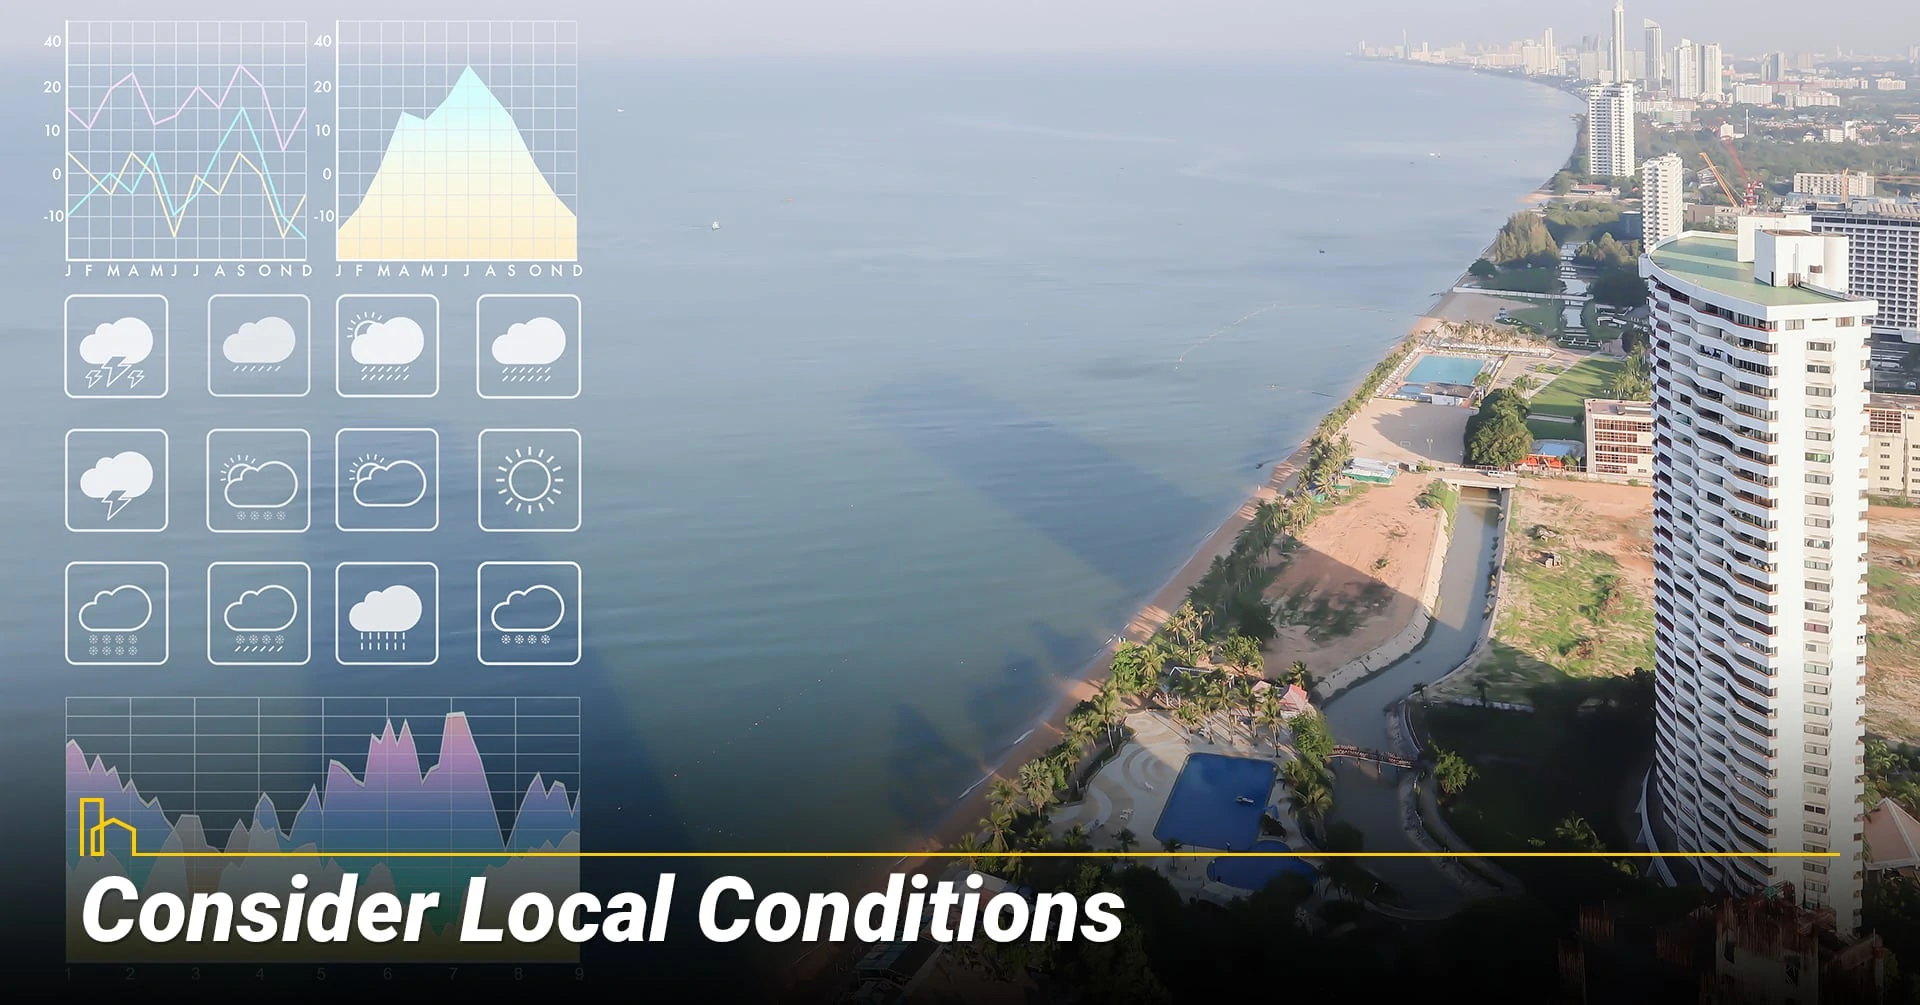 Consider Local Conditions, take a look at local weather